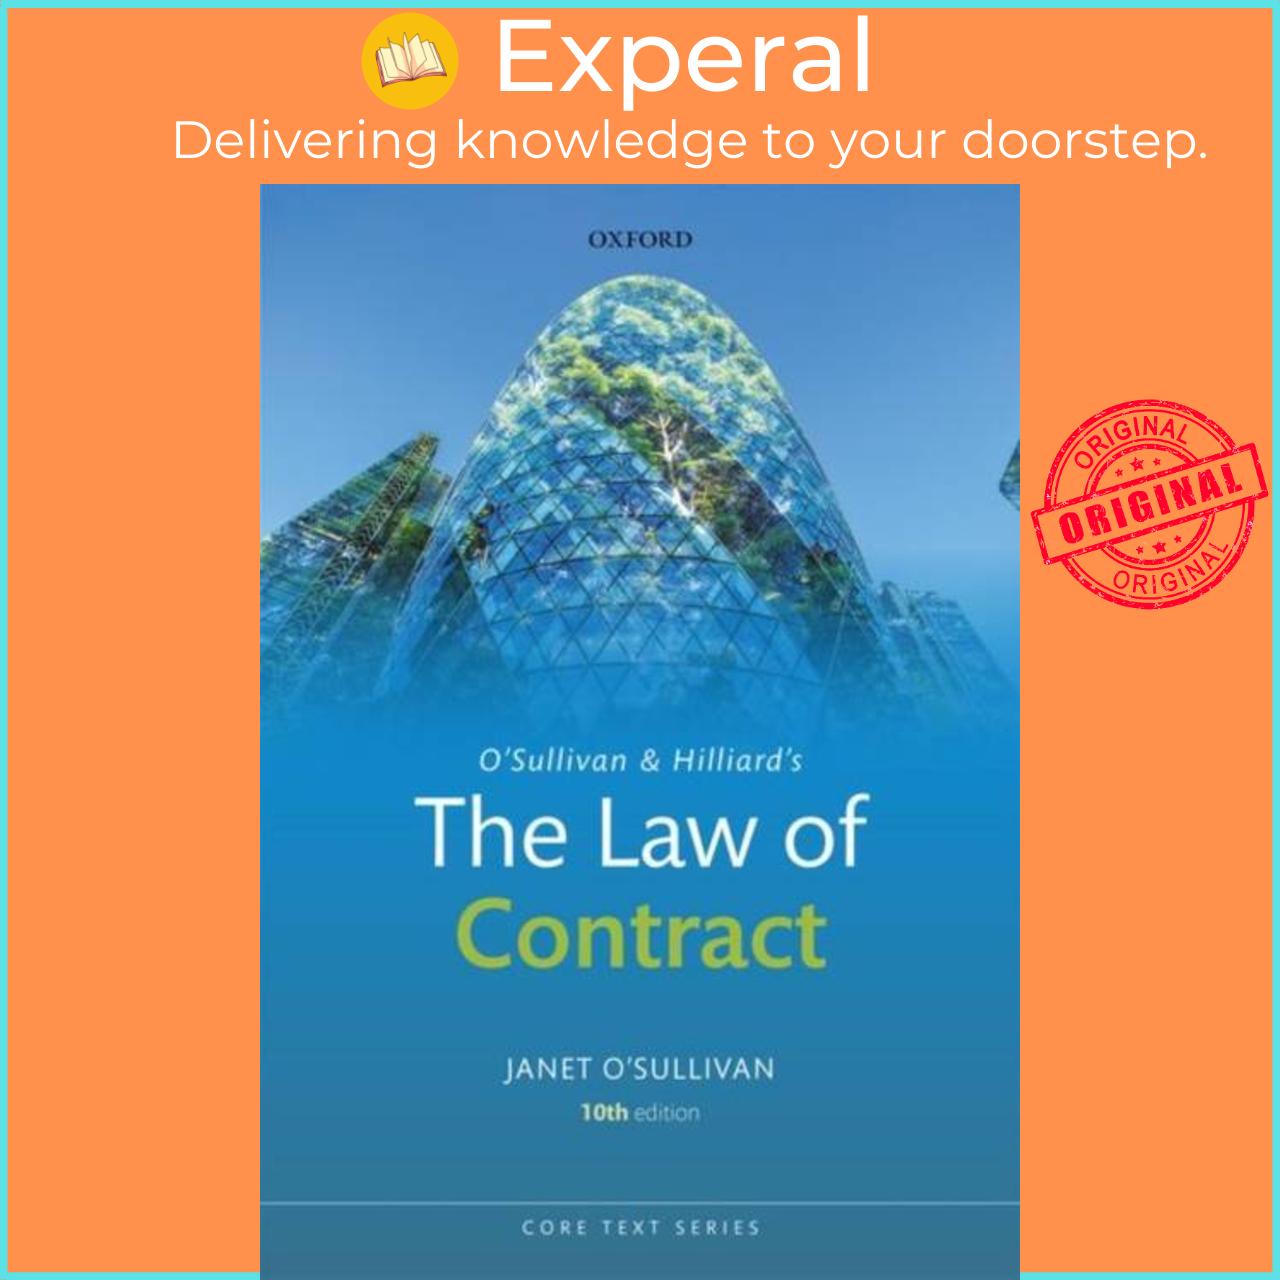 Sách - O'Sullivan & Hilliard's The Law of Contract by Janet O'Sullivan (UK edition, paperback)